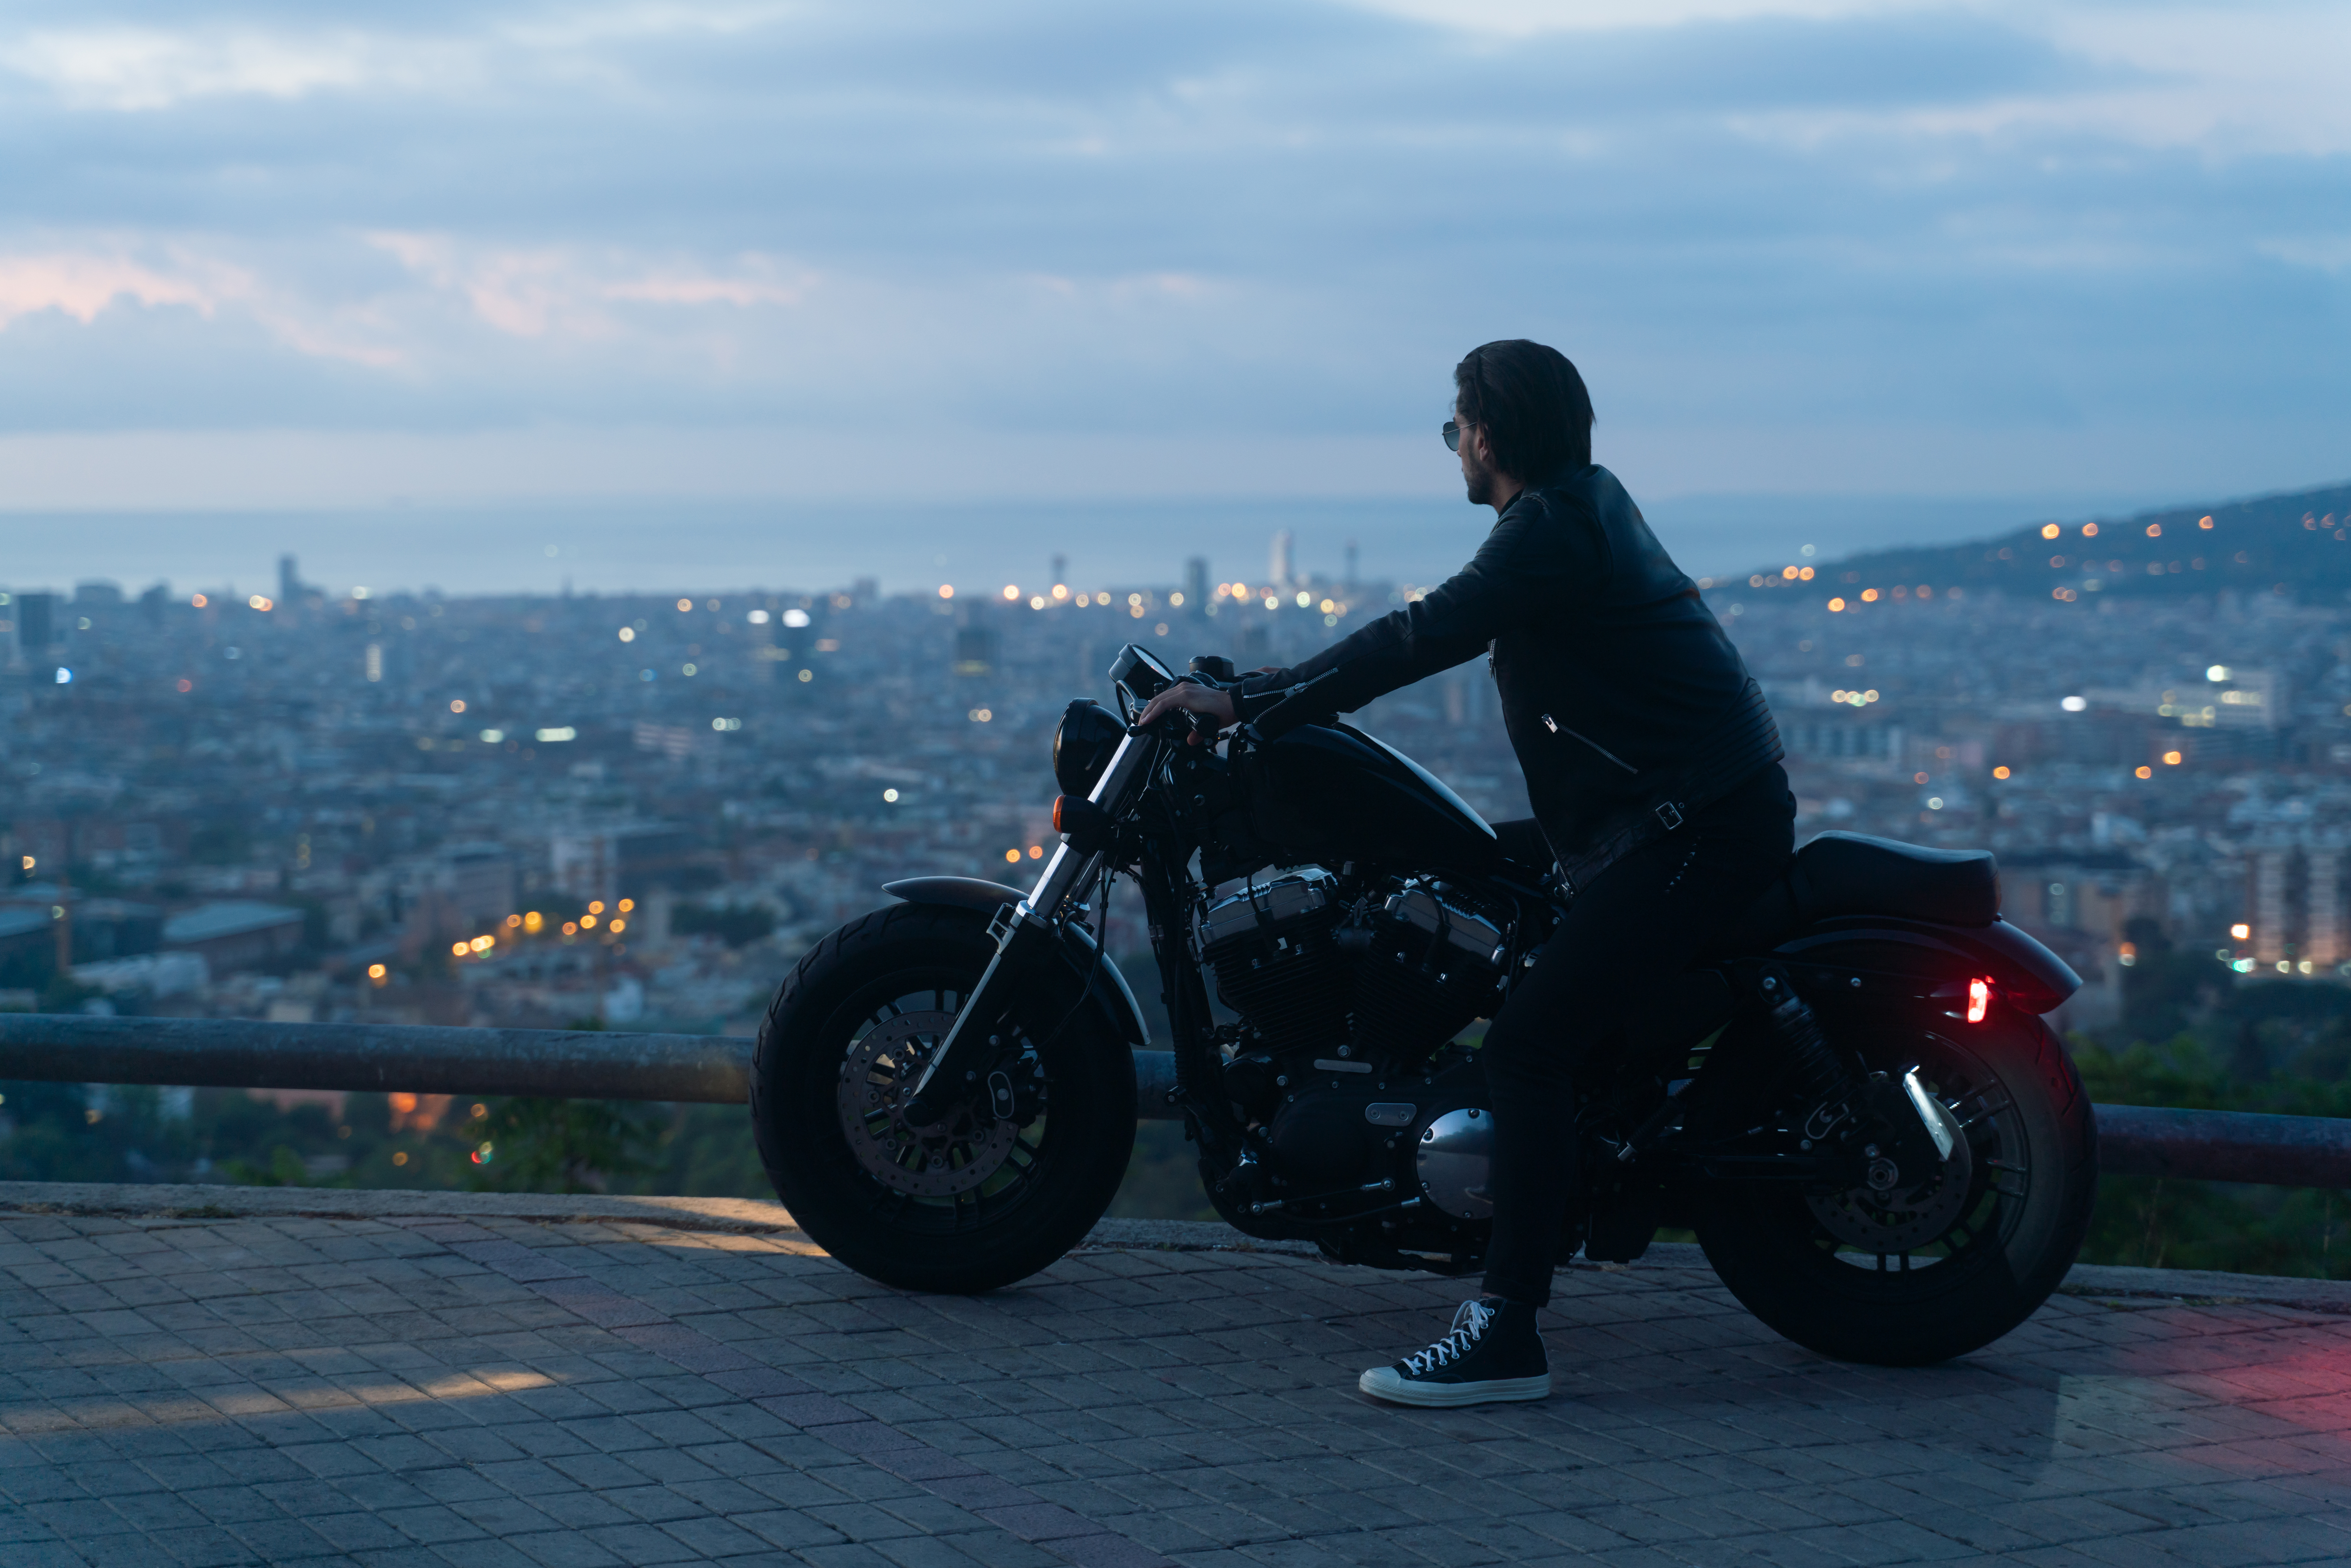 Biker or moto rider after sunset, doing his trip ride with beautiful city views at background